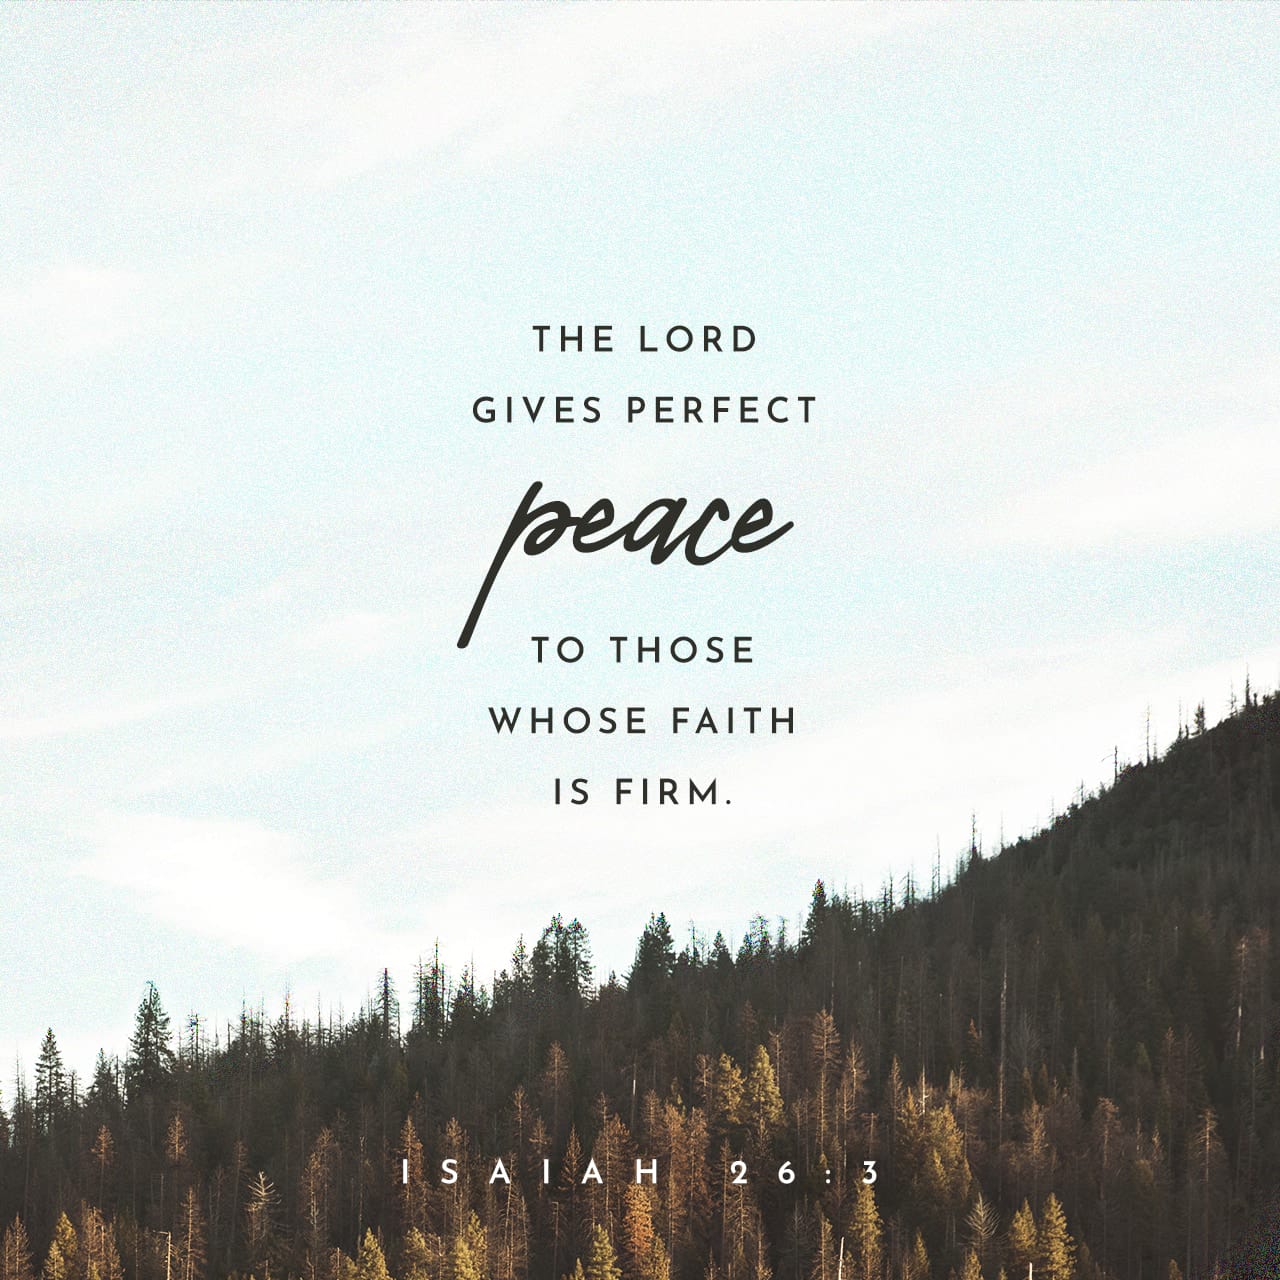 kjv he will keep in perfect peace